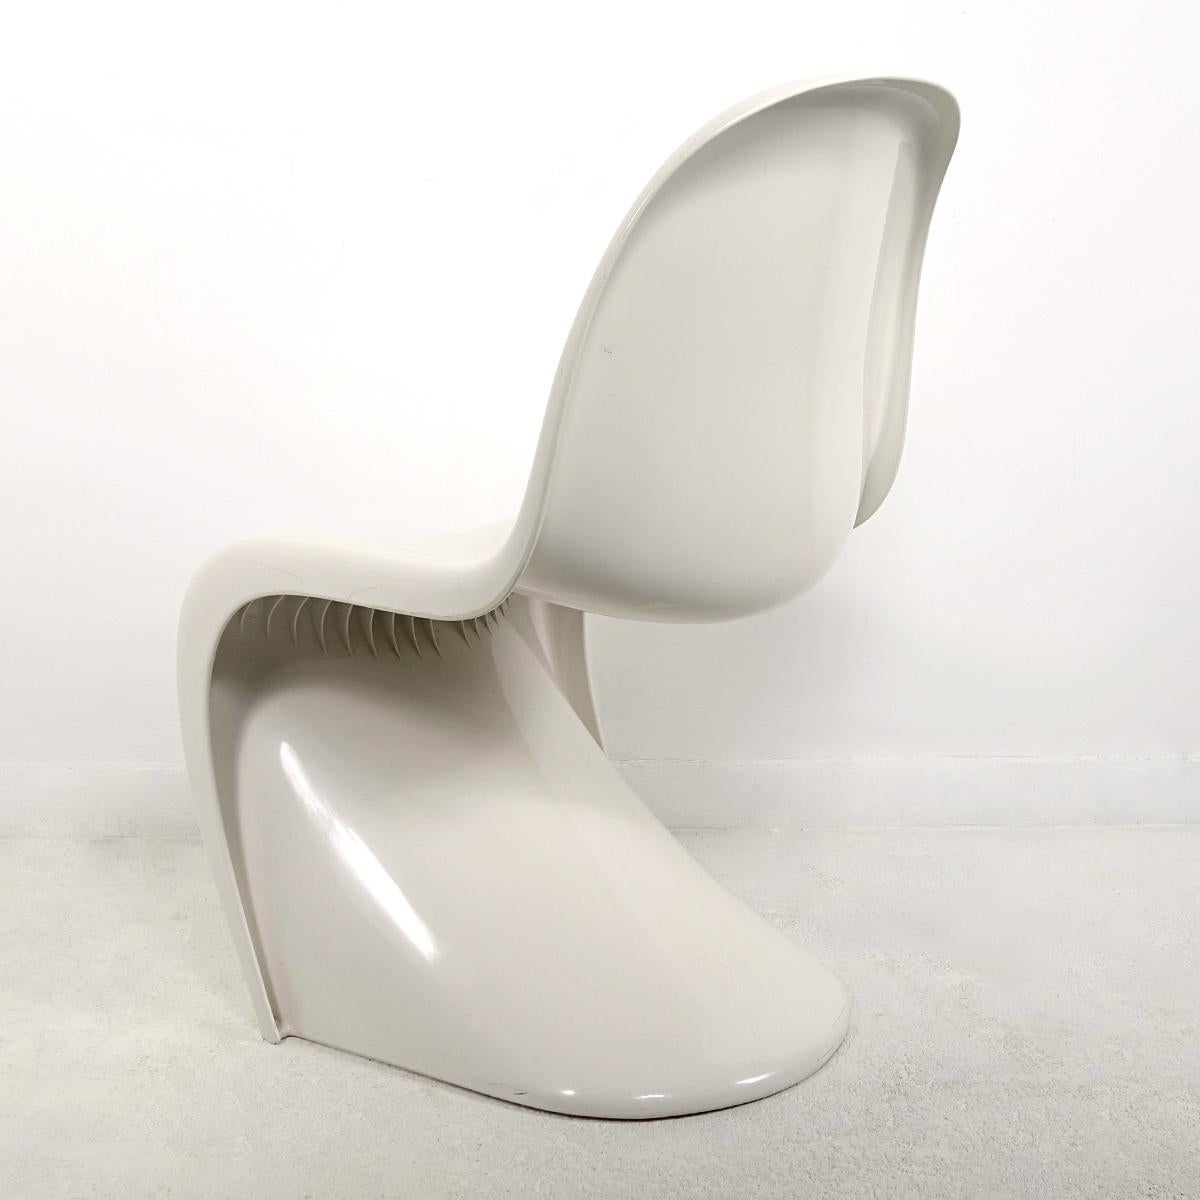 Molded Gloss White Panton S-Chair by Verner Panton / Herman Miller Fehlbaum Production For Sale